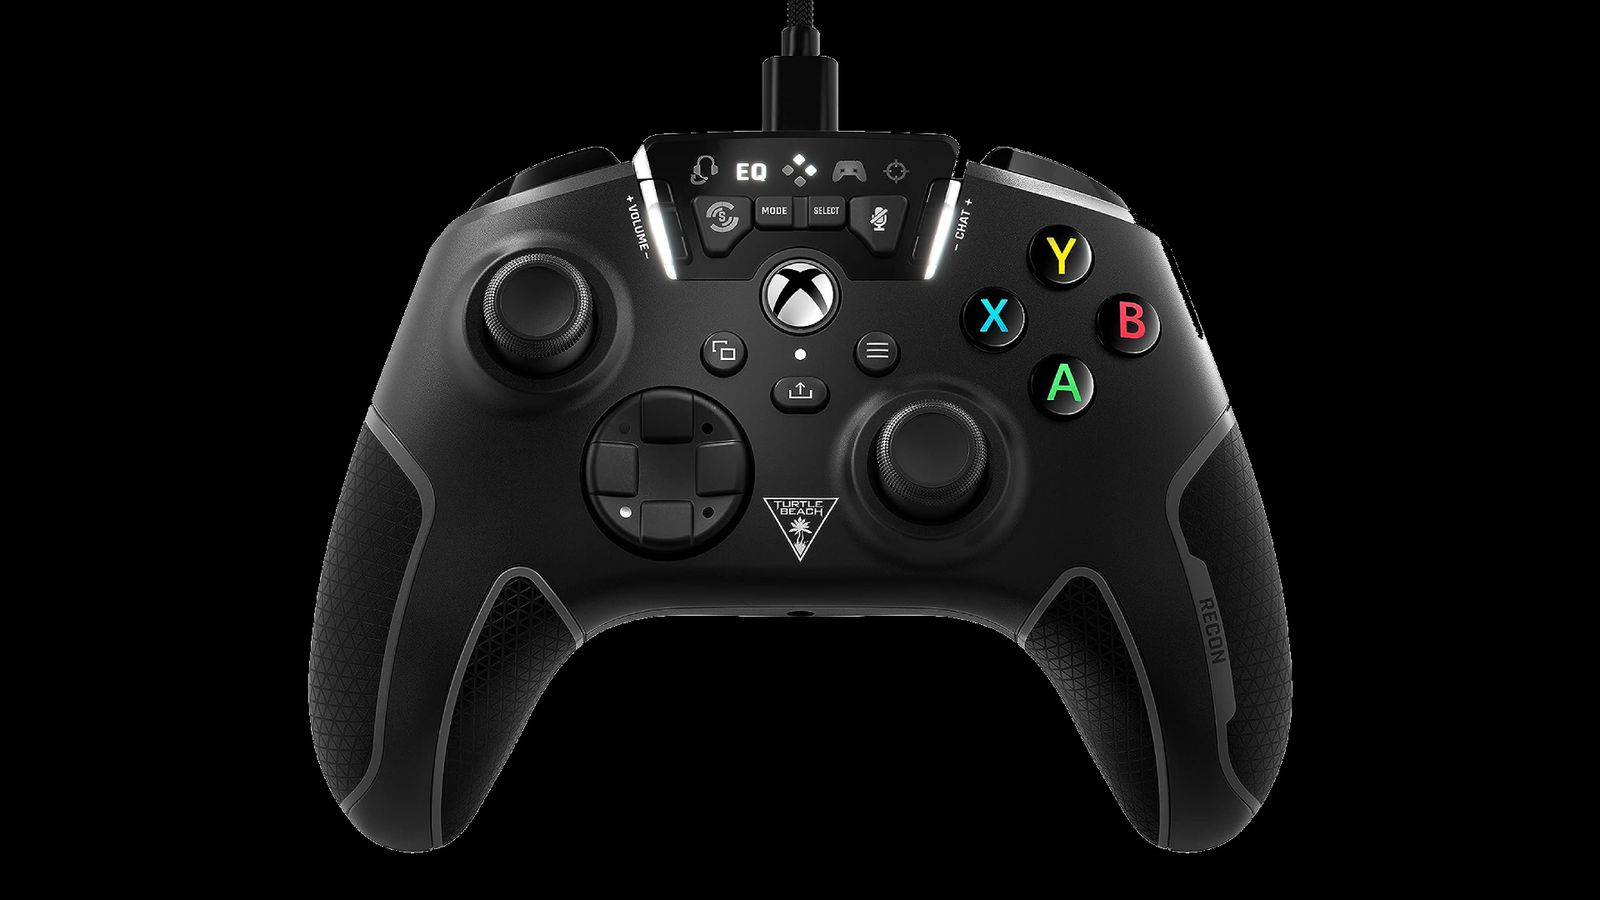 Turtle Beach Recon product image of a black Xbox-style controller with multiple additional buttons.